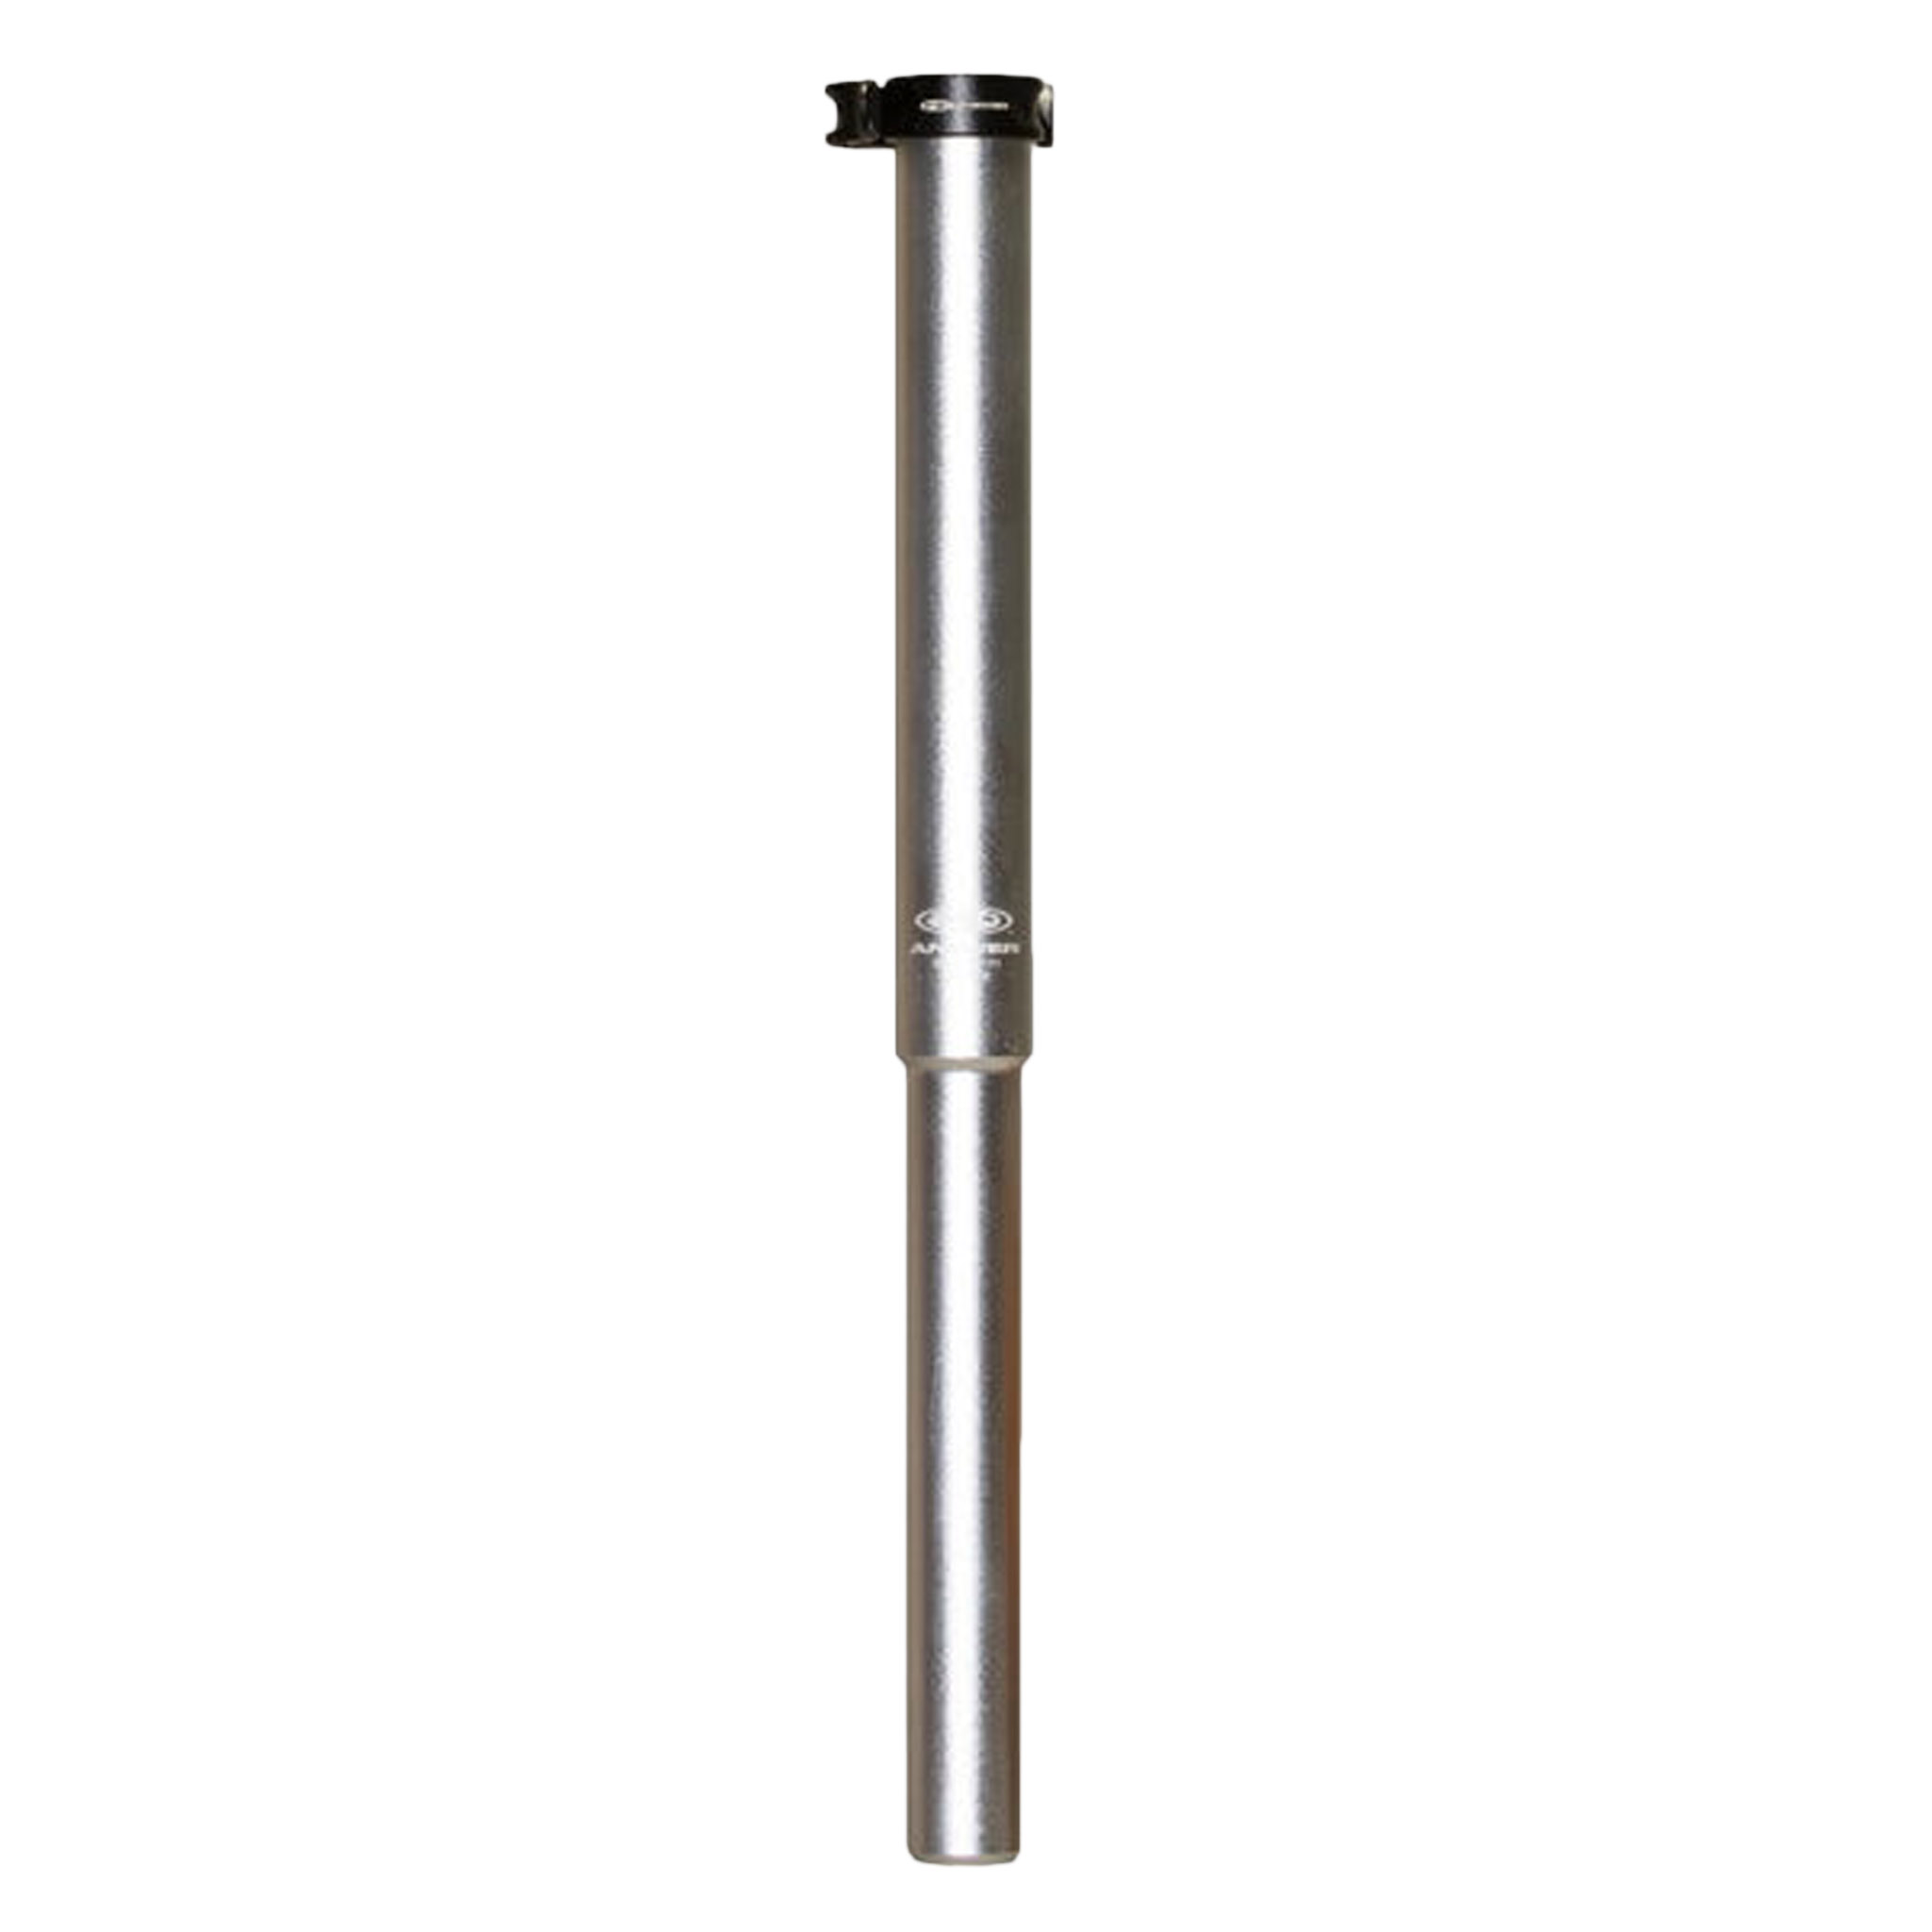 AnswerBMX Seatpost Extender, 27.2x407mm, Silver